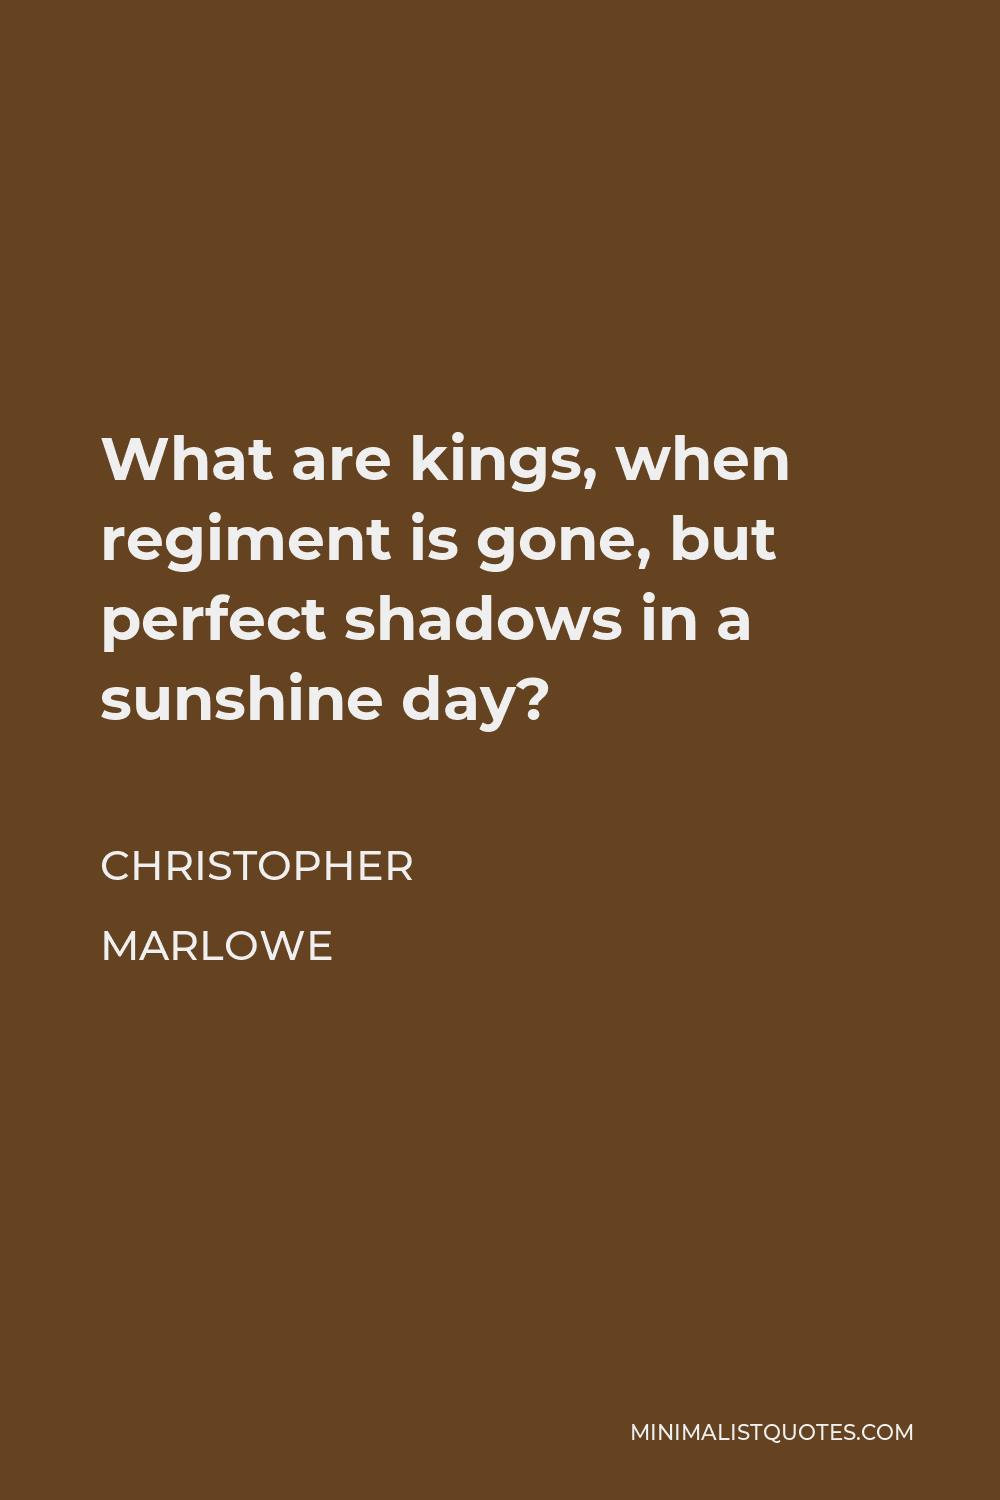 Christopher Marlowe Quote - What are kings, when regiment is gone, but perfect shadows in a sunshine day?